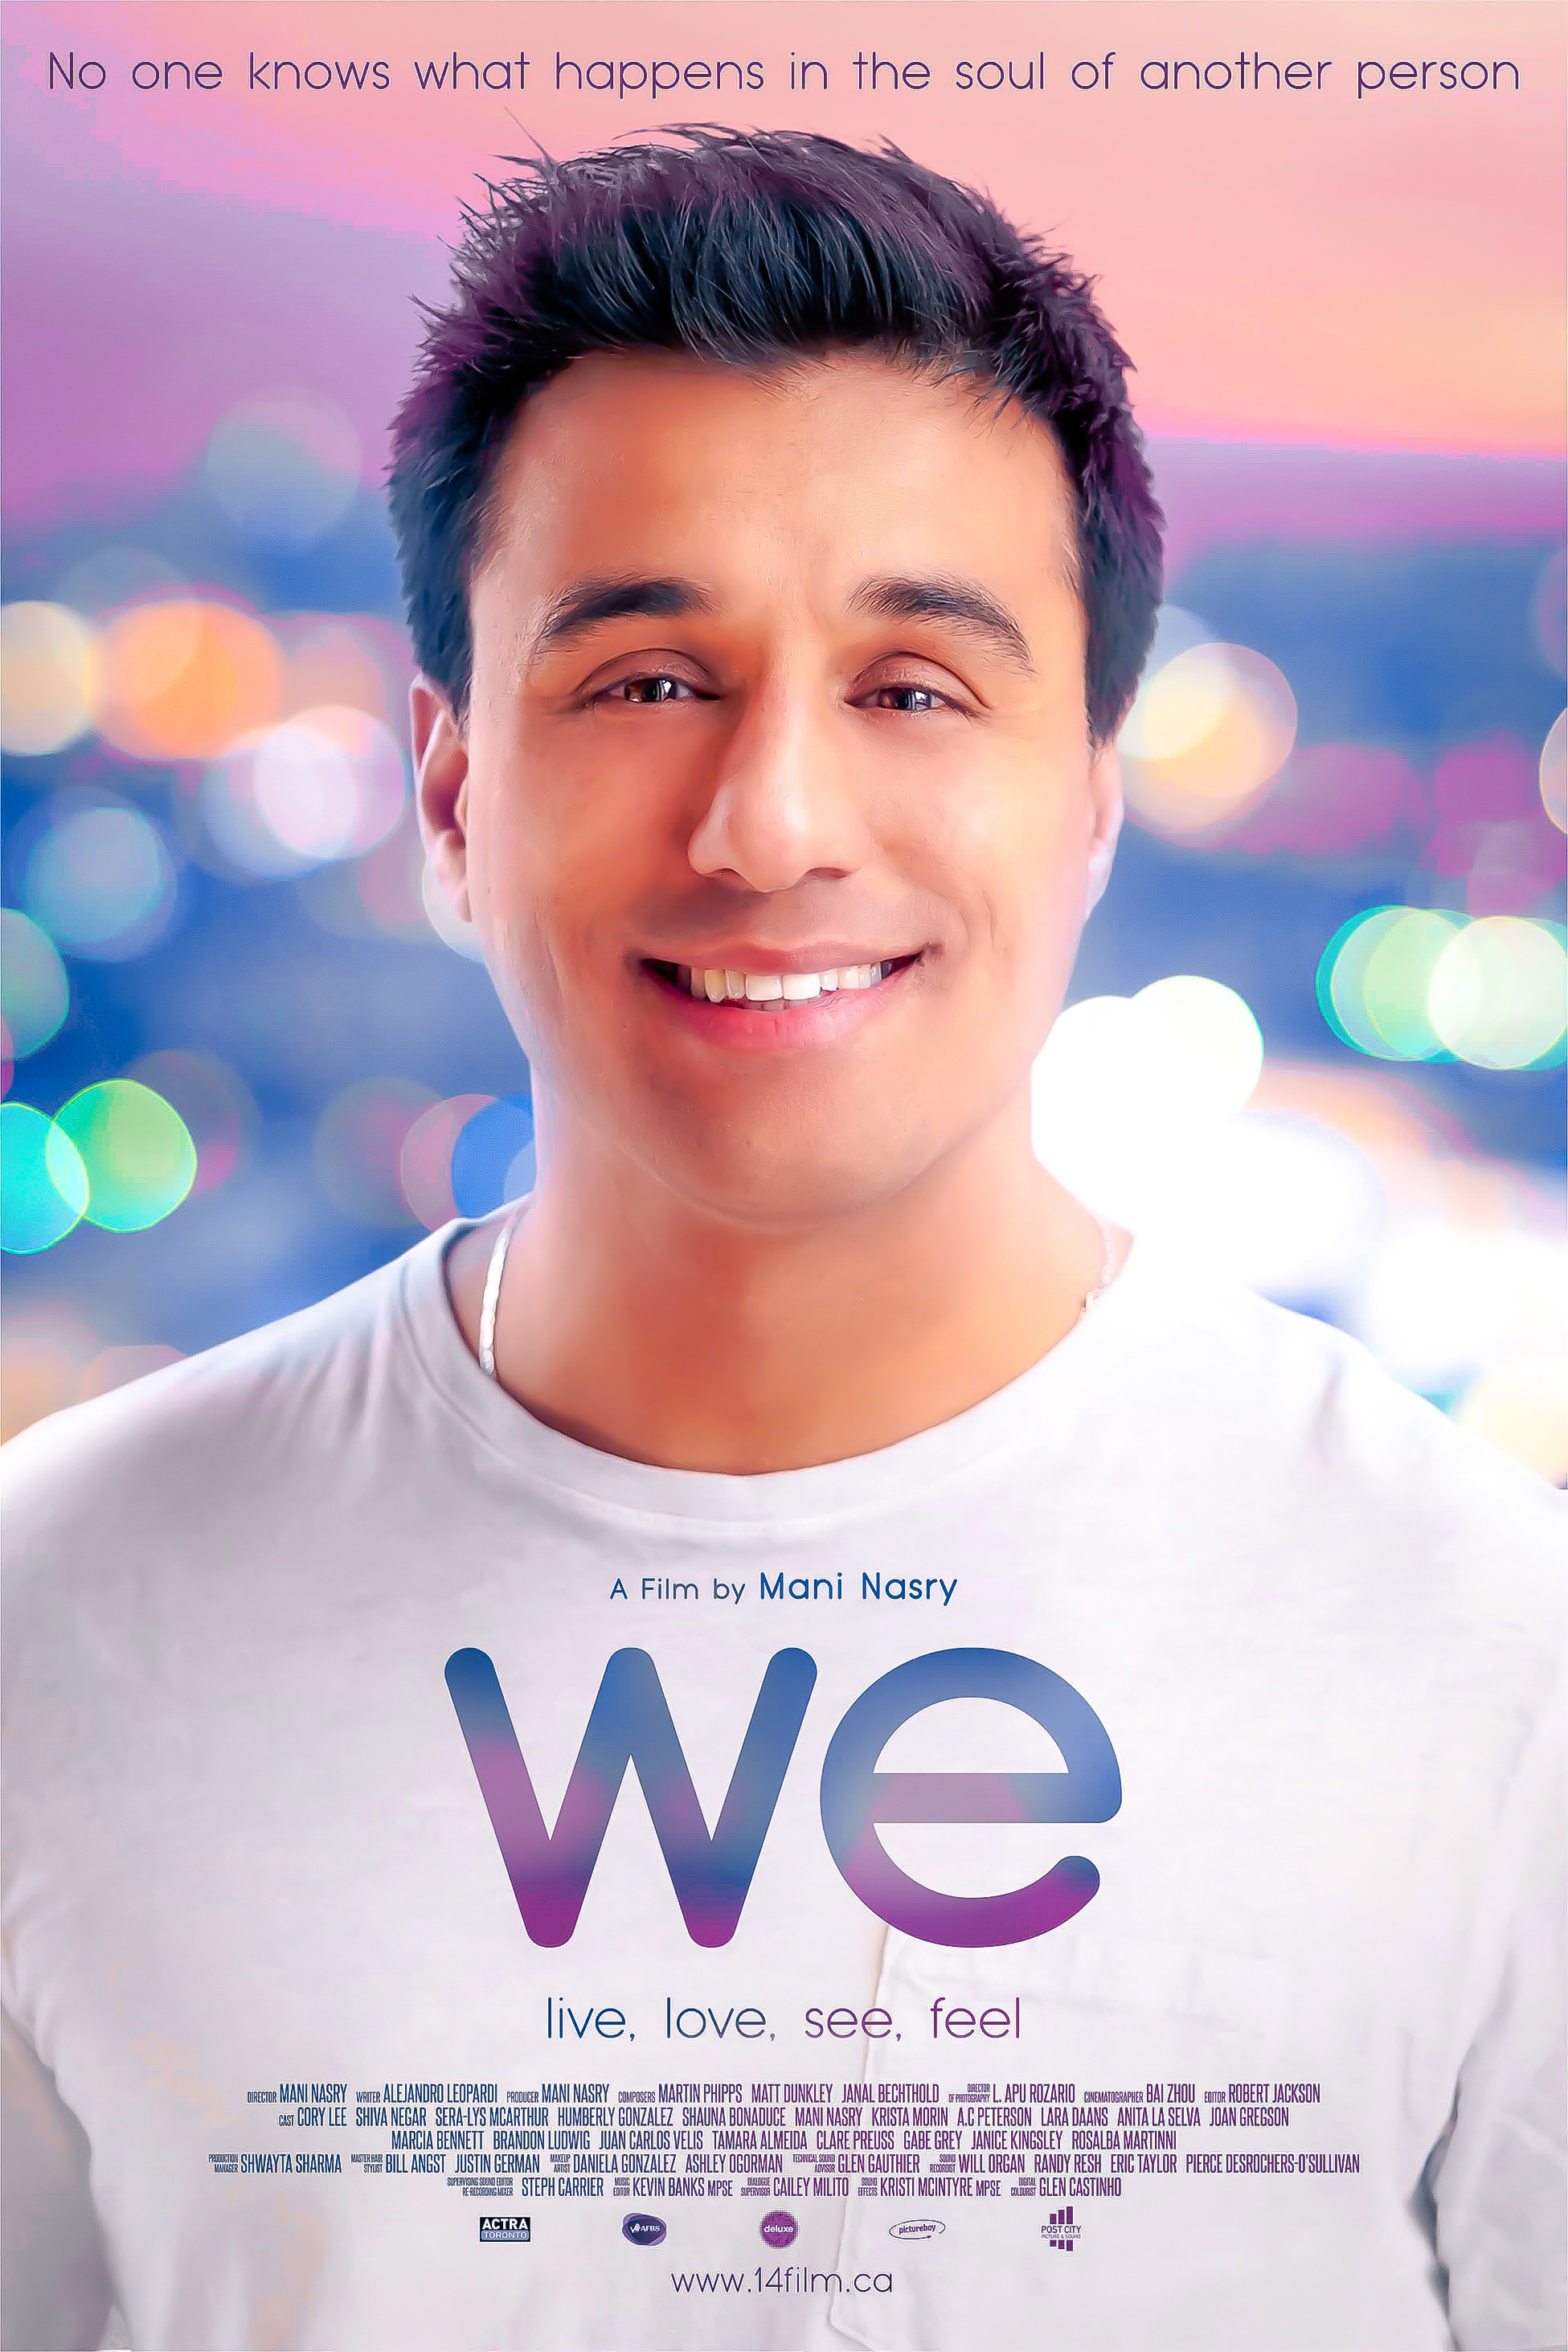 Mani Nasry's 14 Film Released the Film "We" (2021) on Immigration, Equality, Diversity and Unity. Available on Amazon Prime, Google Play and Vudu.